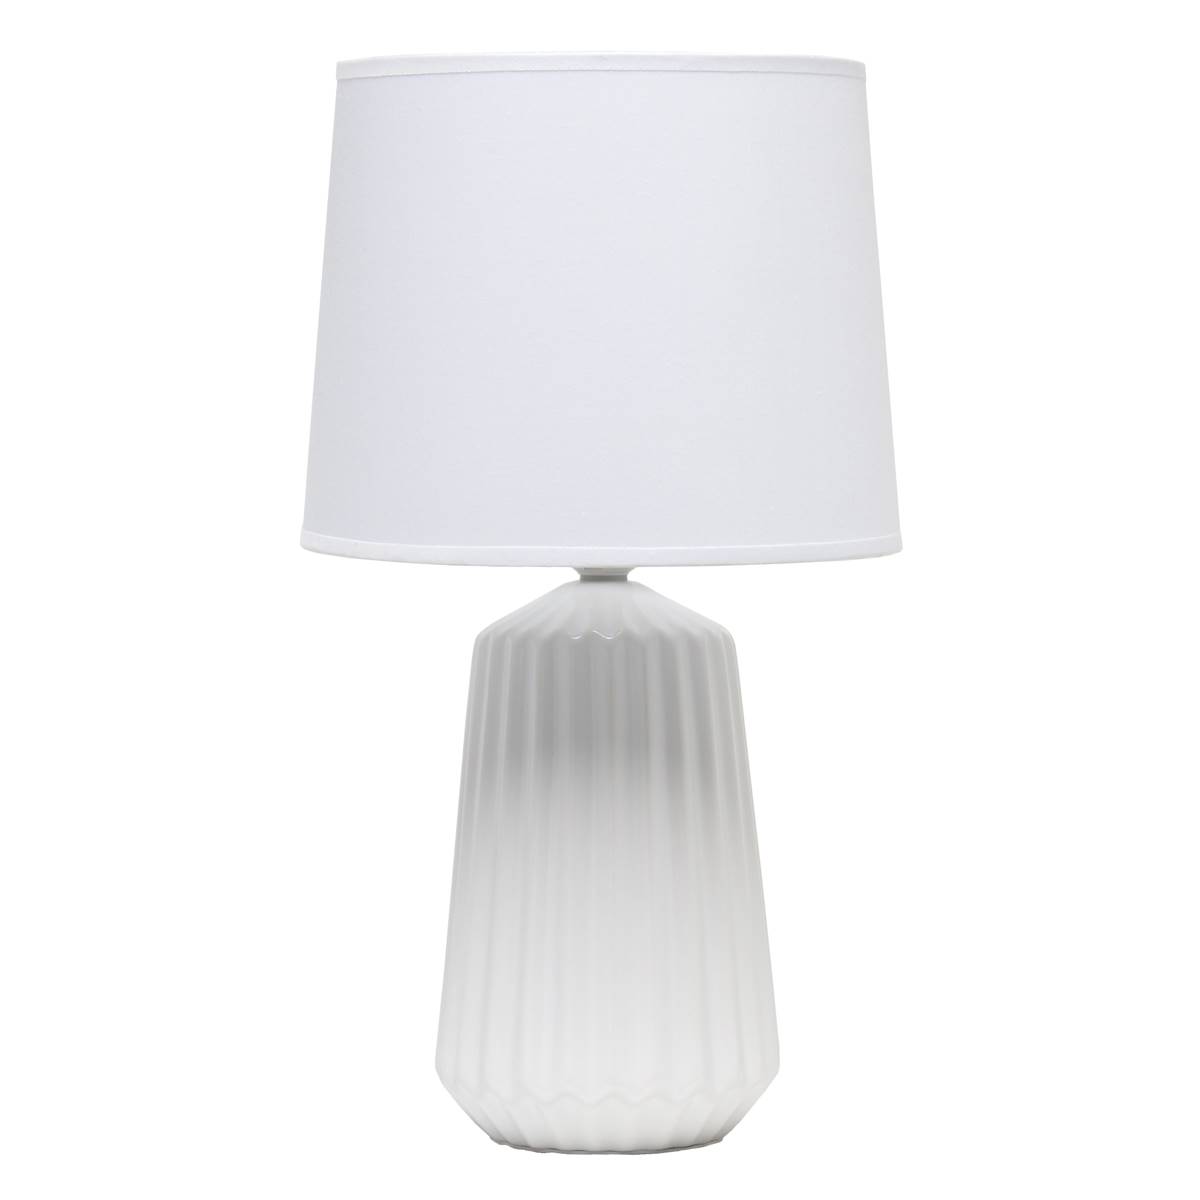 Simple Designs Off White Ceramic Pleated Base Table Lamp W/Shade